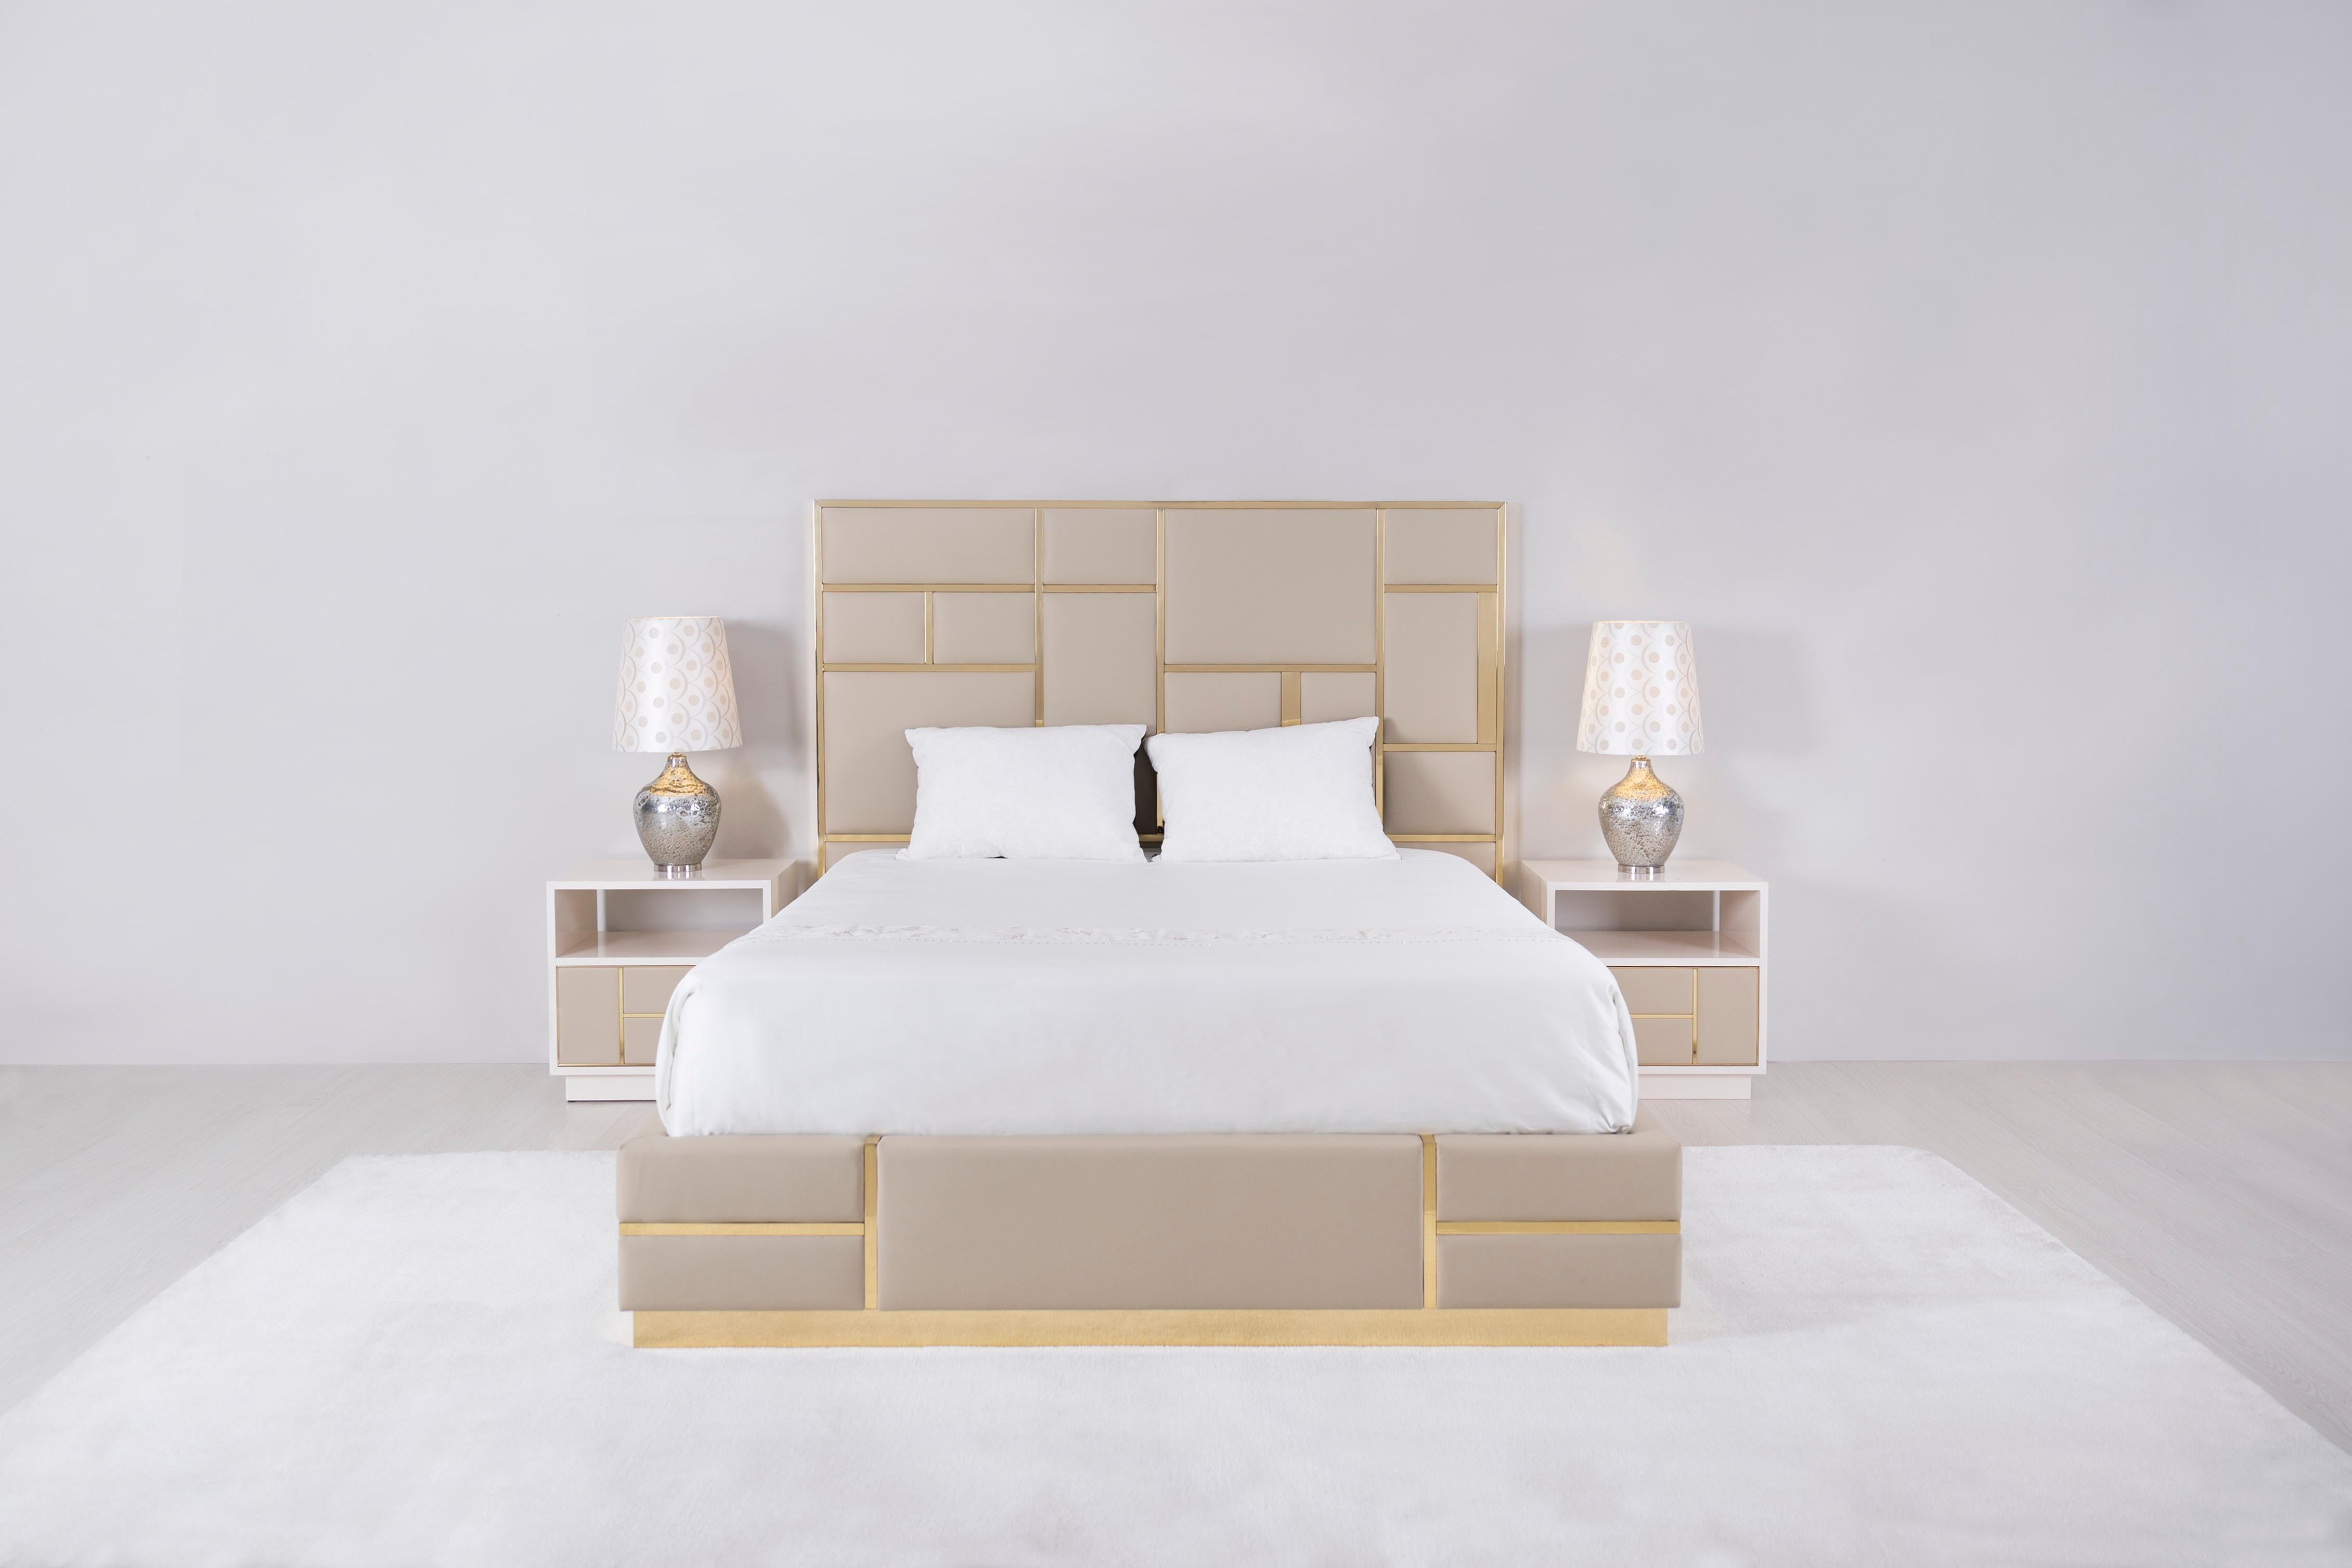 Elisa Bed, Contemporary Collection, Handcrafted in Portugal - Europe by Greenapple.

The elegant Elisa bed is upholstered in high-quality Italian leather in beige and designed to combine modern comfort with elegant details. The shiny polished brass